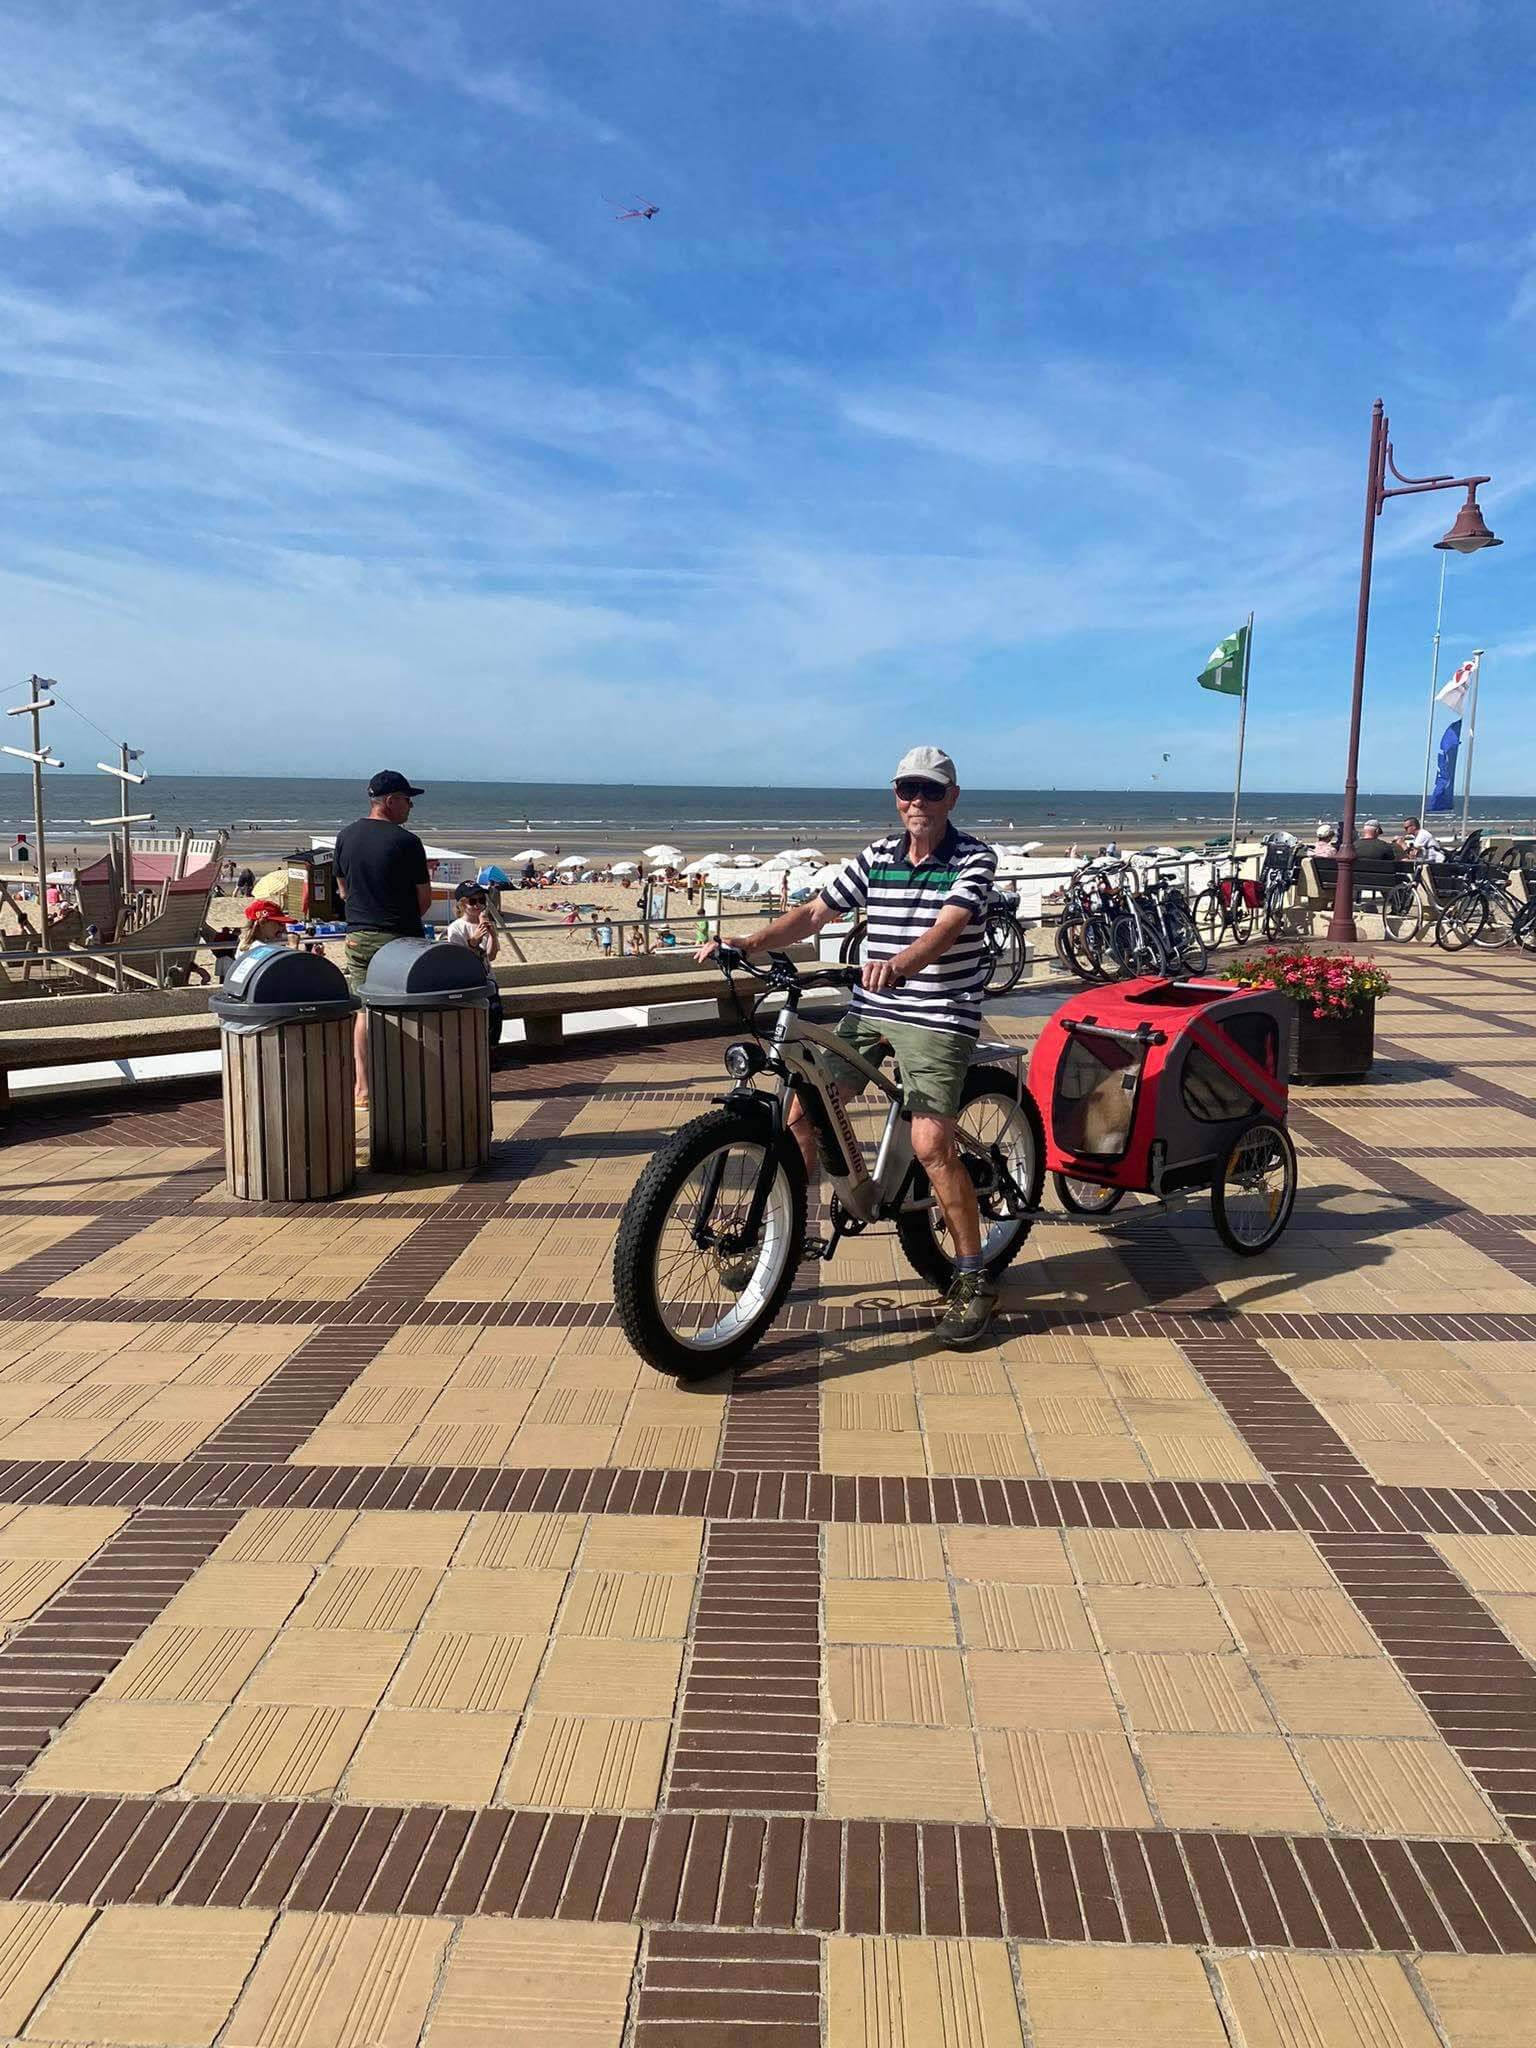 An old man goes to the beach on an electric bicycle